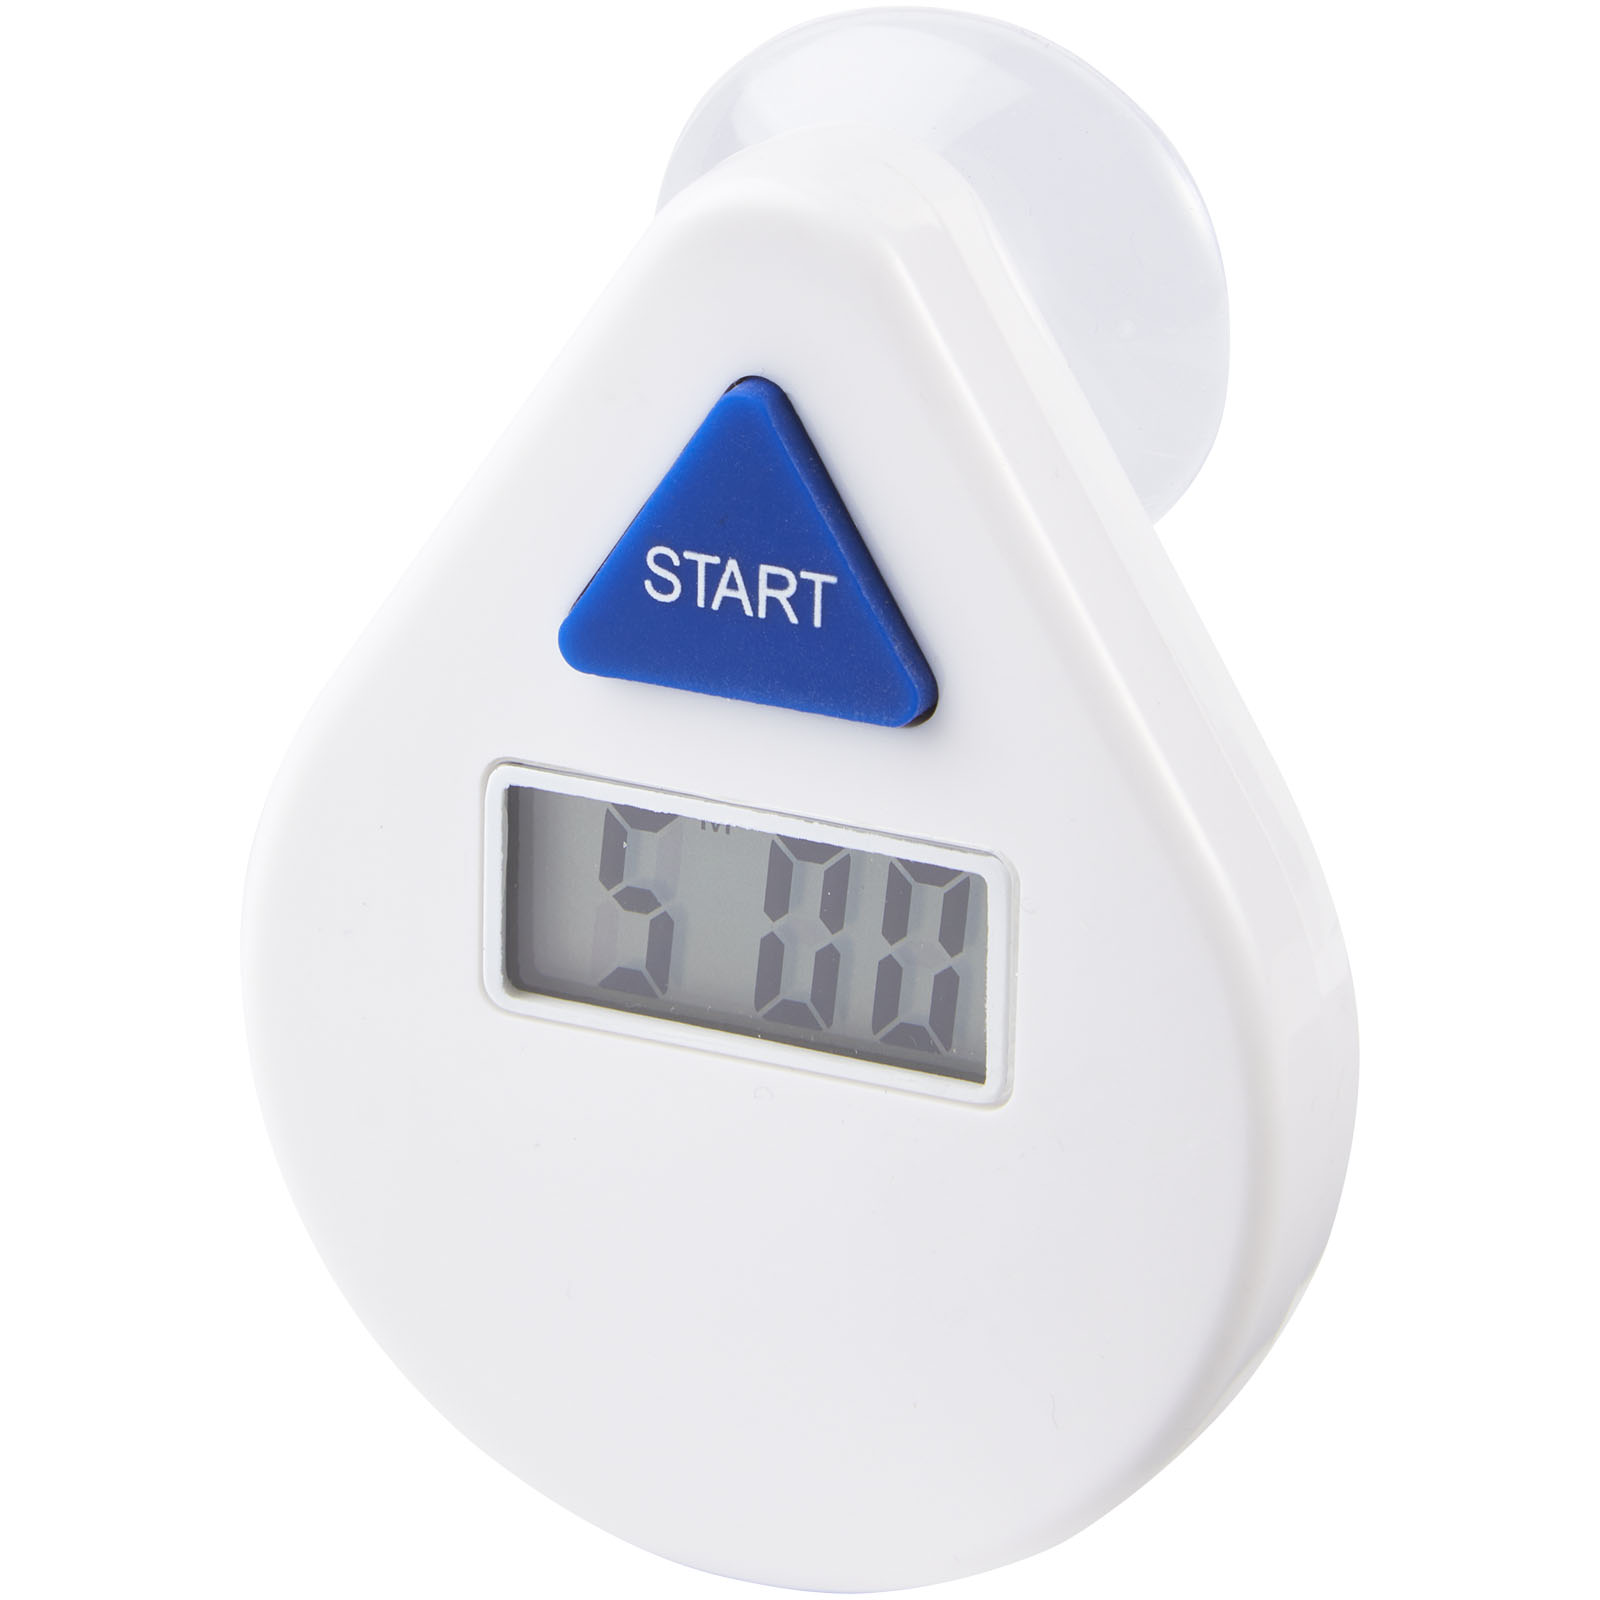 Advertising Home Accessories - Guitty digital shower timer - 2